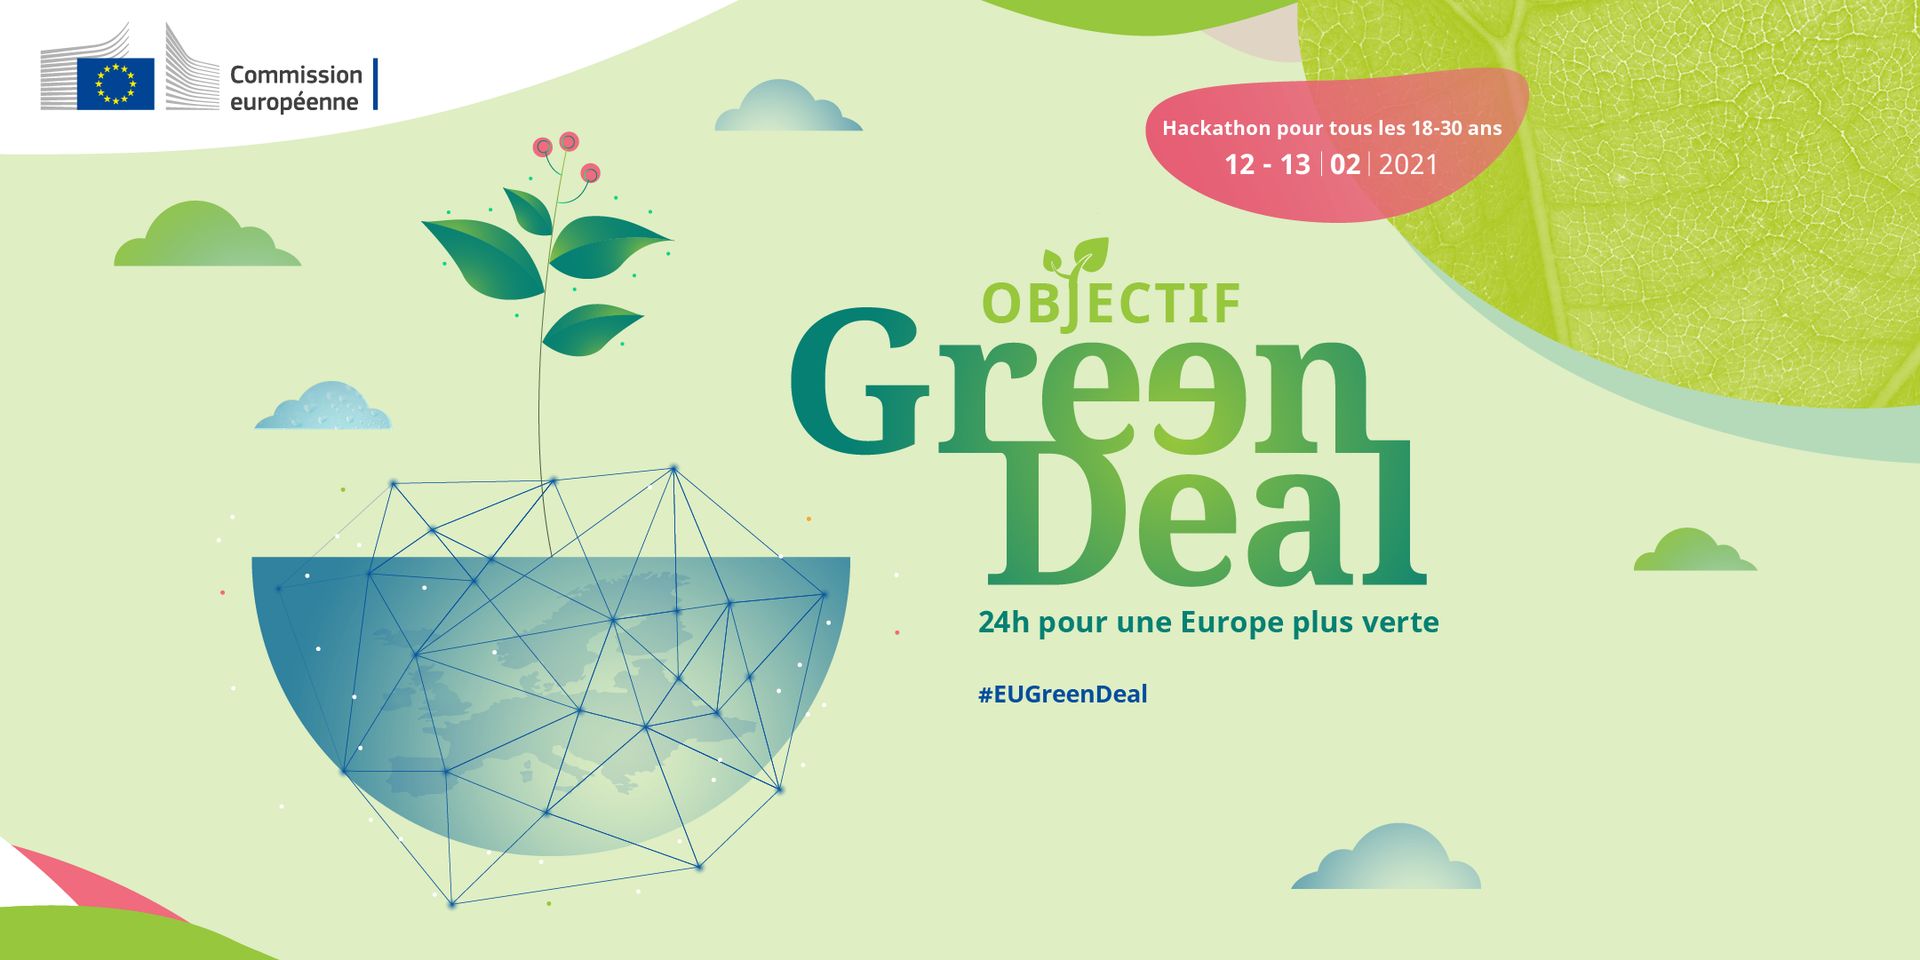 GREEN DEAL OBJECTIVE BY THE EUROPEAN COMMISSION, Online, France